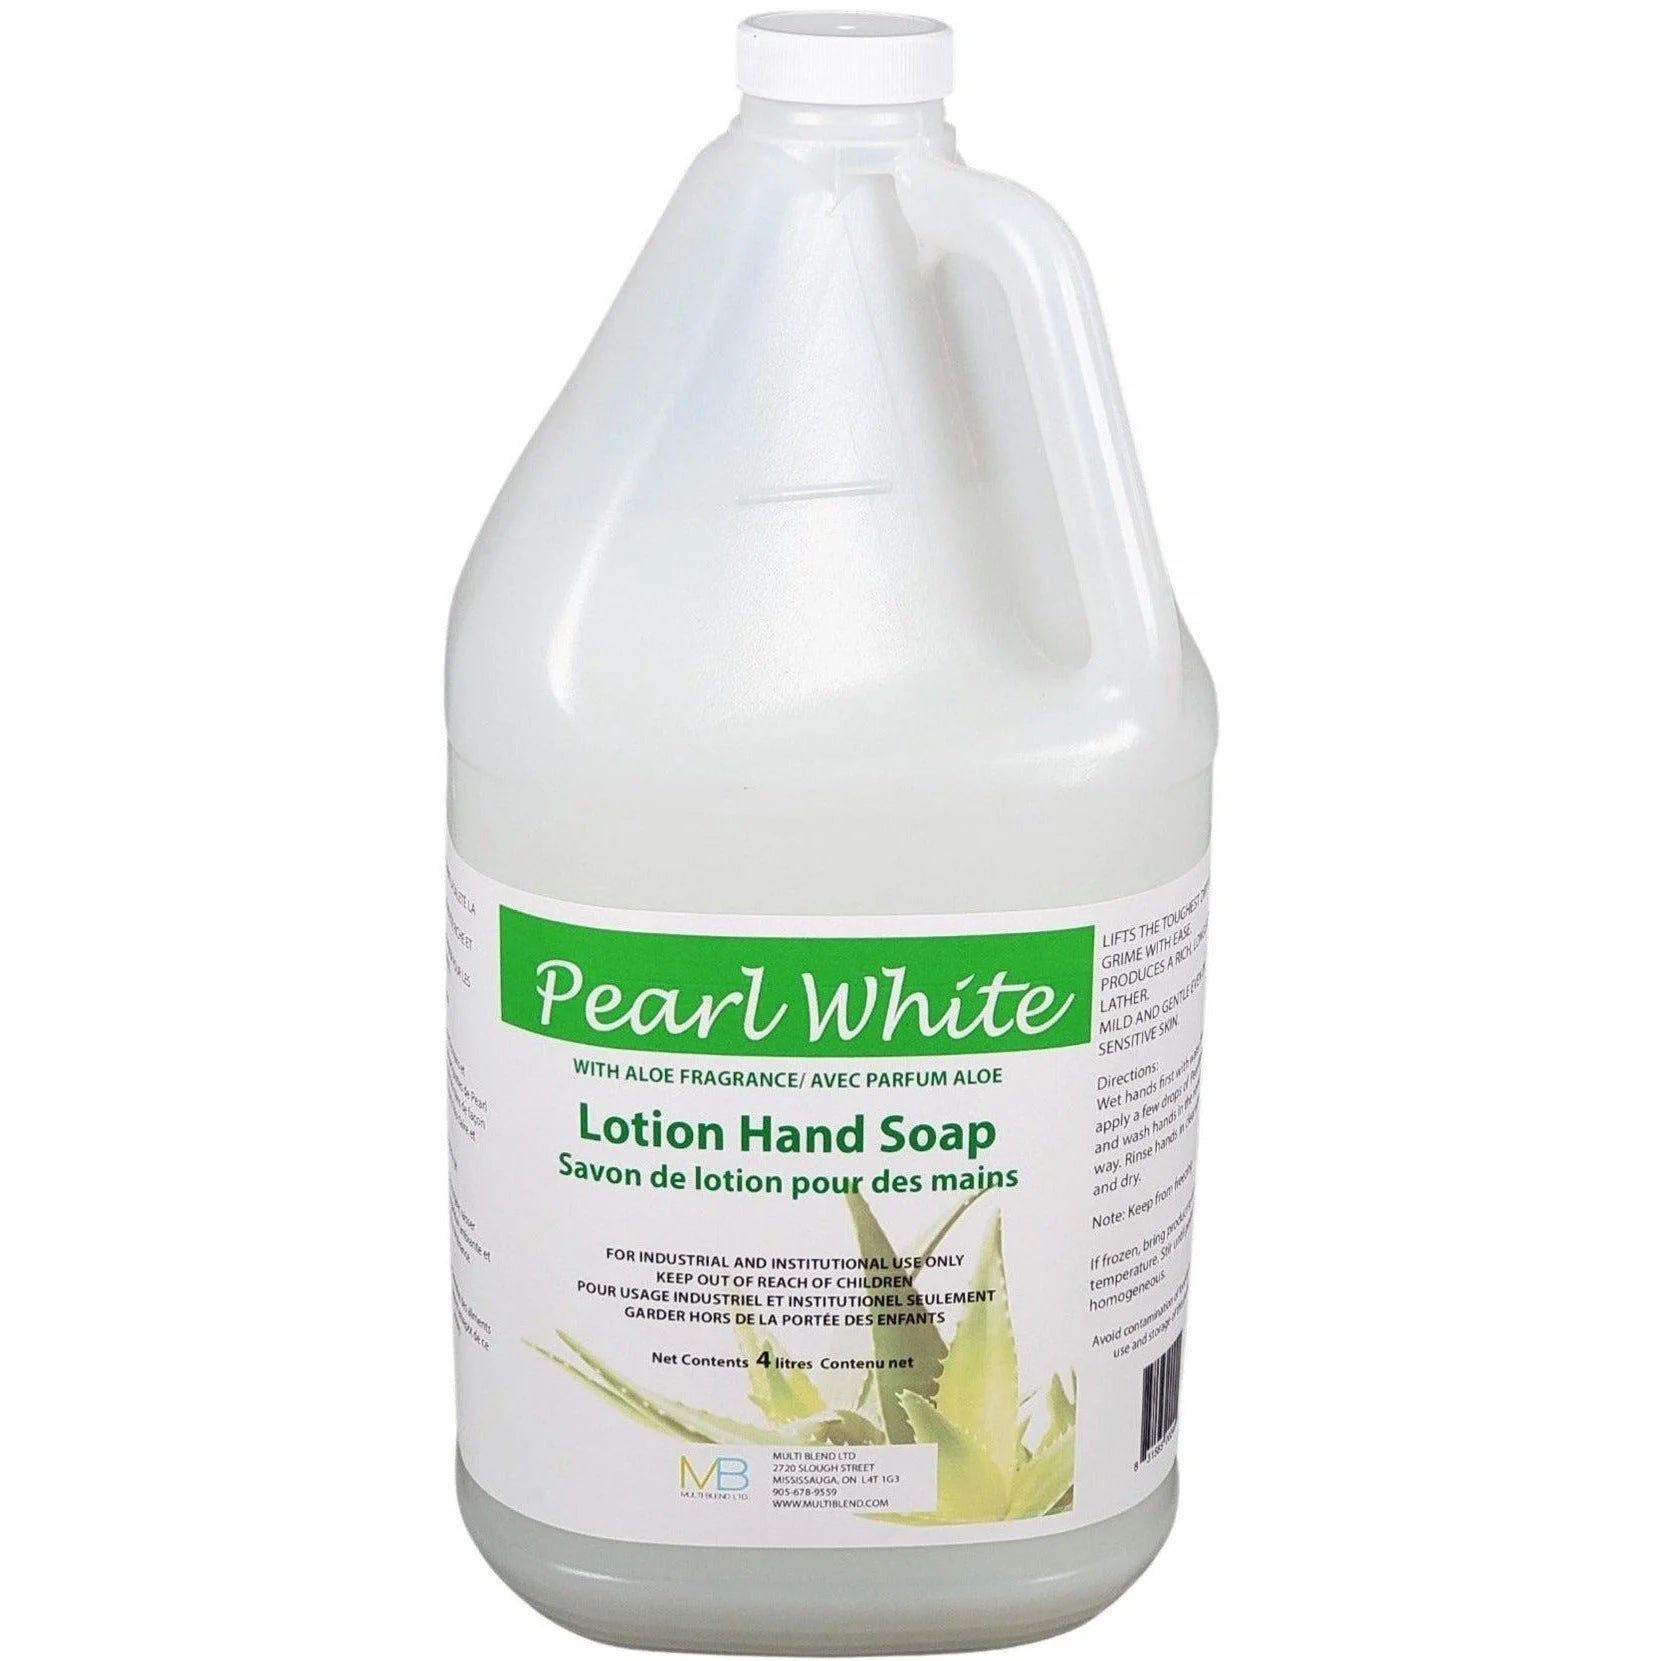 Pearl White Antimicrobial Lotion Hand Soap with Aloe Fragrance- 4L Jug